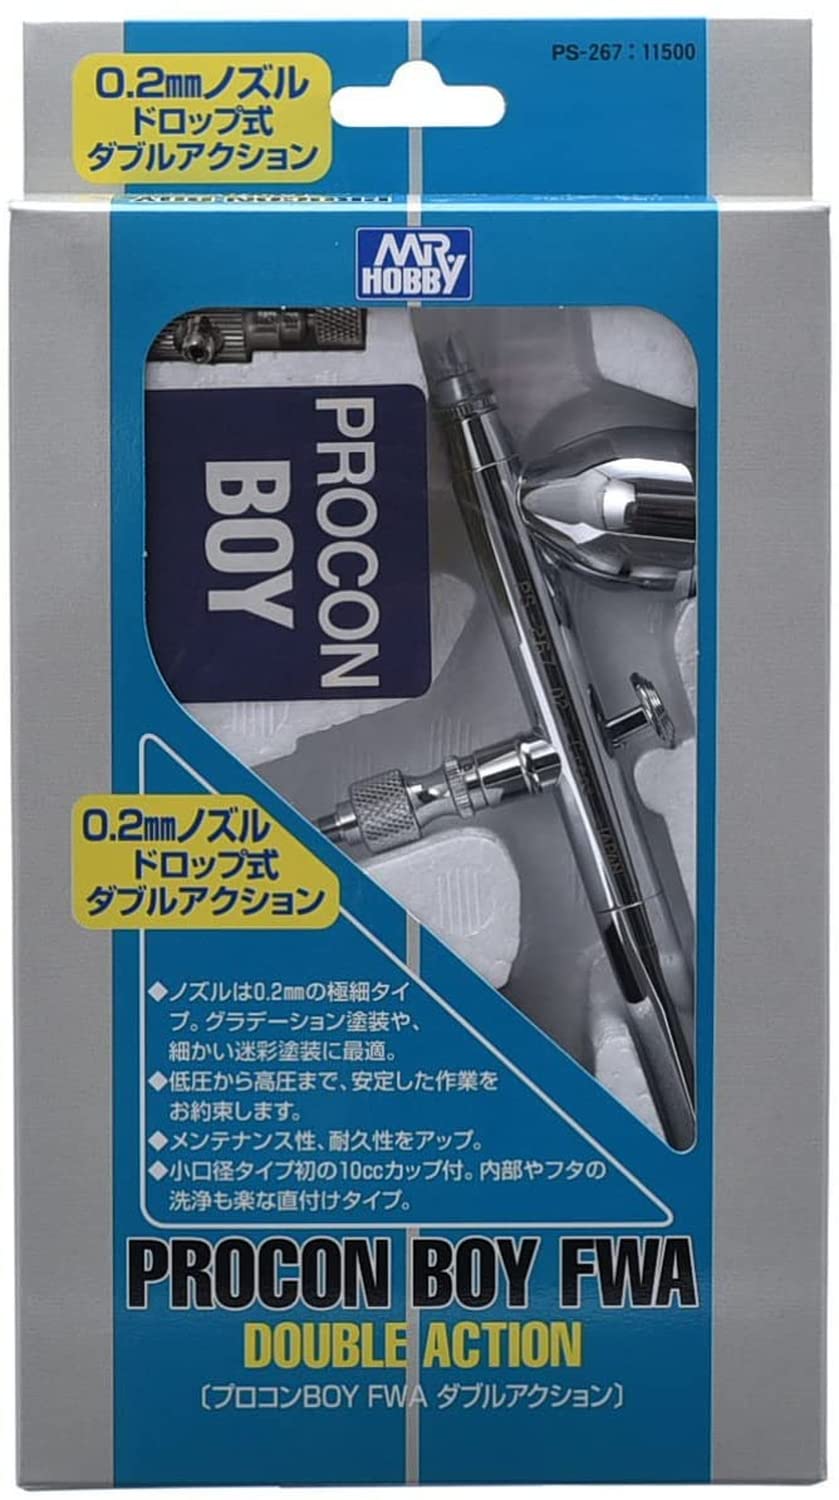 Sleek black and silver Procon Boy FWA 0.2mm dual action airbrush by Mr. Hobby, a specialized tool for precise and controlled airbrushing.